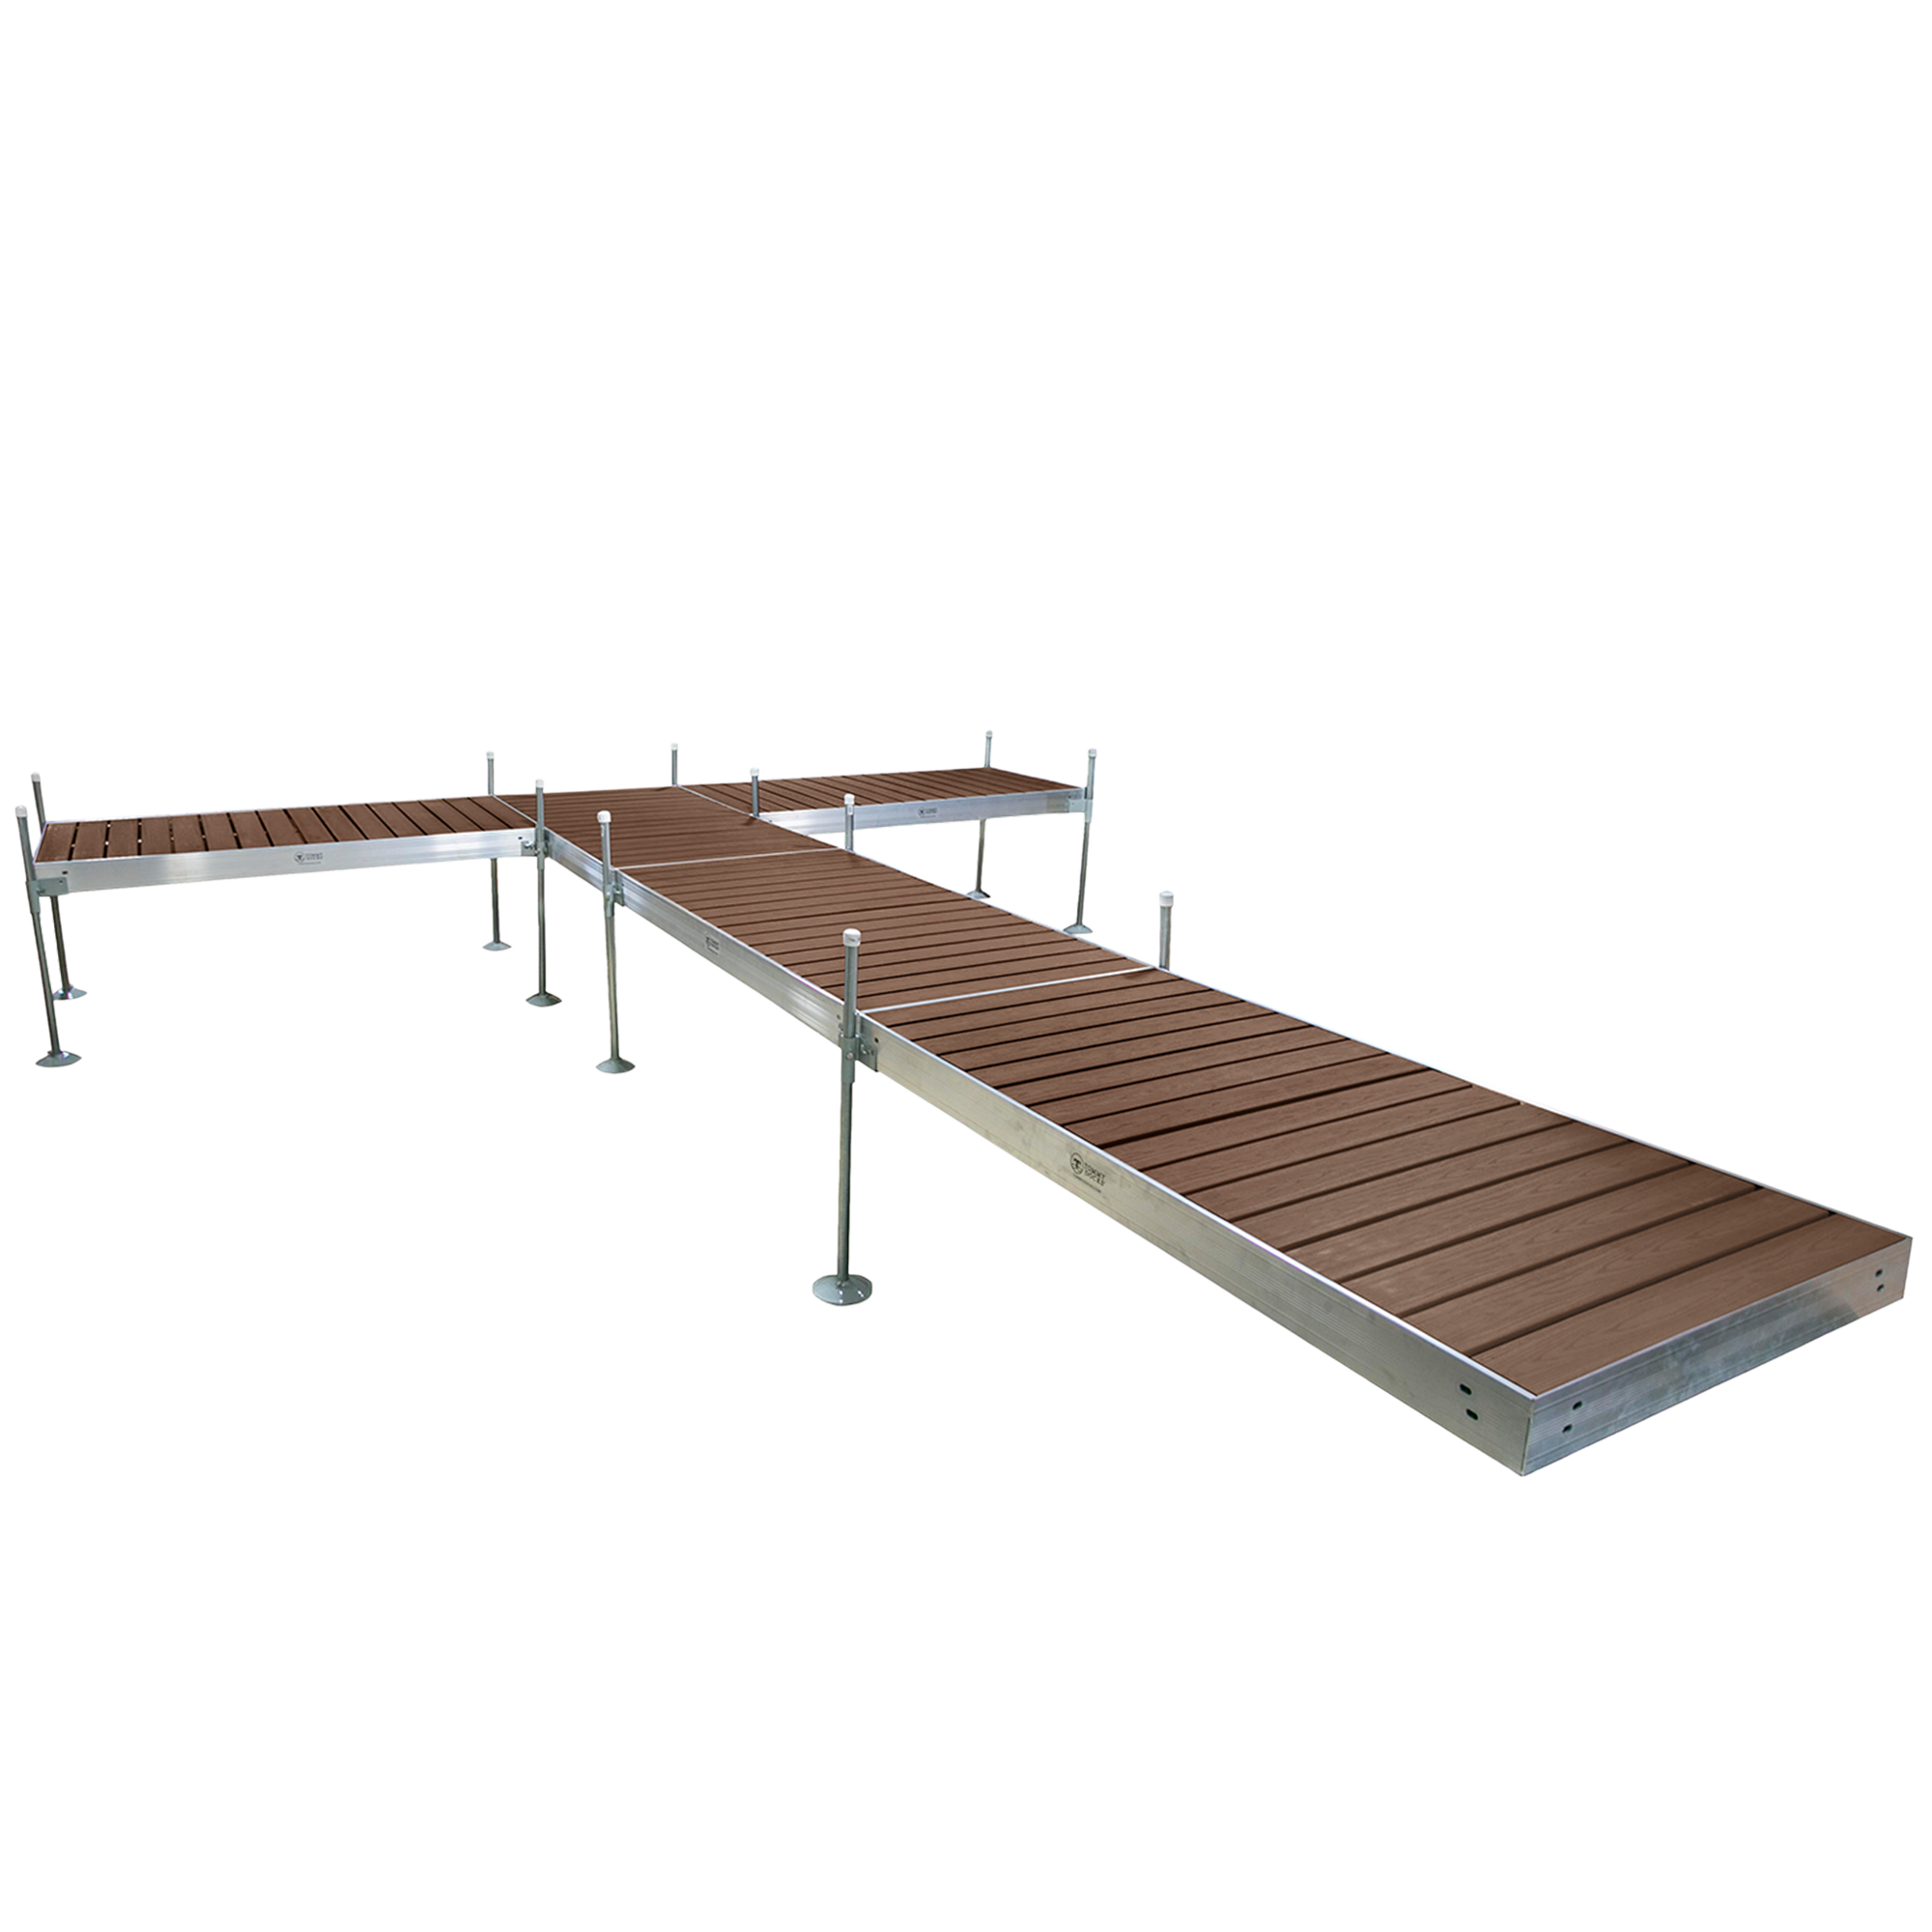 24' T-Shaped Boat Dock System with Aluminum Frame and Brown Composite Decking